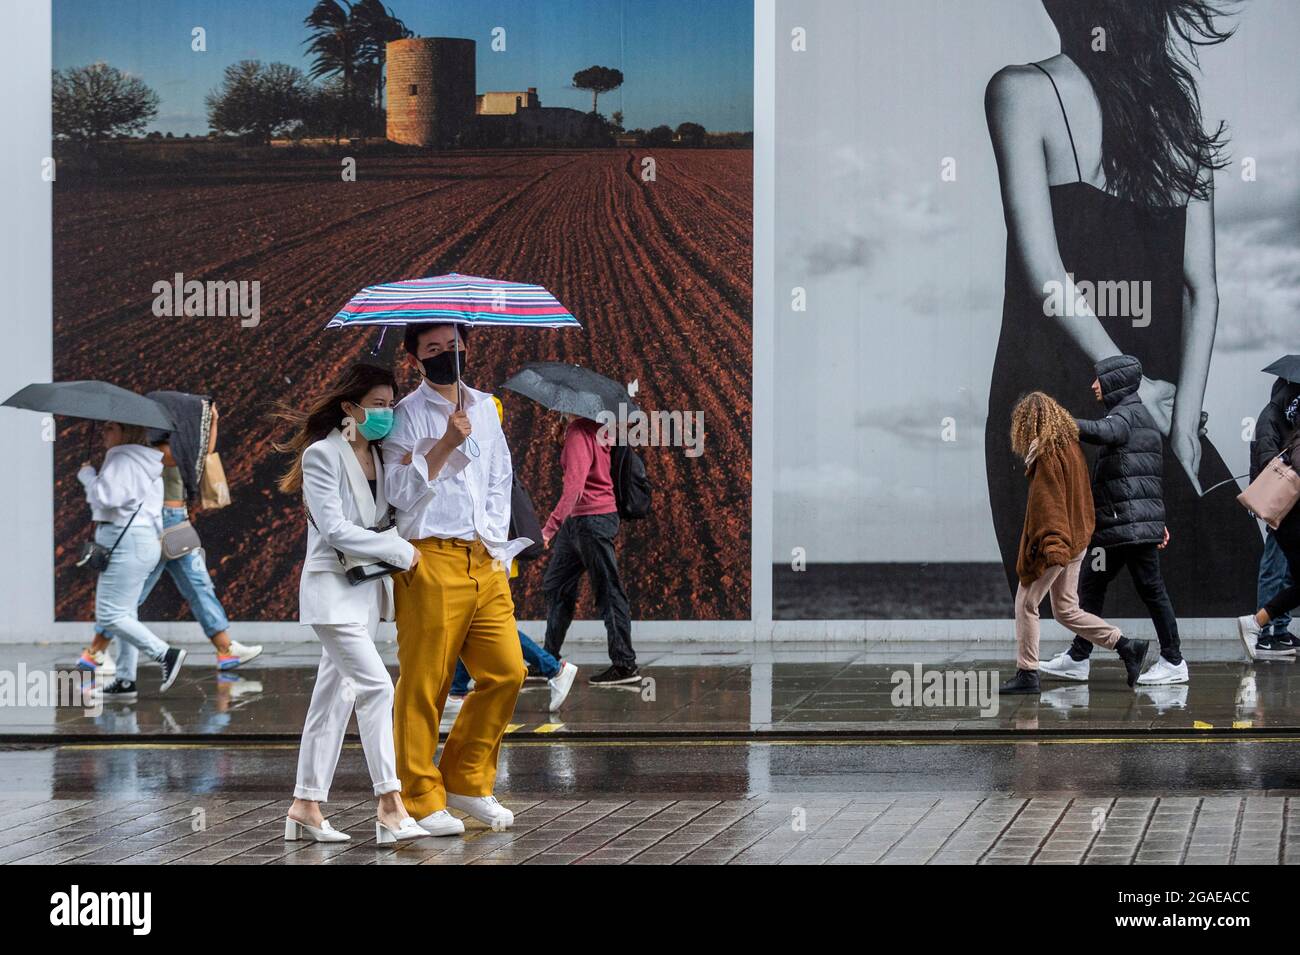 London, UK. 30 July 2021. UK Weather - People in Oxford Street experience windy and rainy conditions as Storm Evert passes across the capital. Yellow warnings for wind and thunderstorms are in place across the east and south-east of England.  Credit: Stephen Chung / Alamy Live News Stock Photo